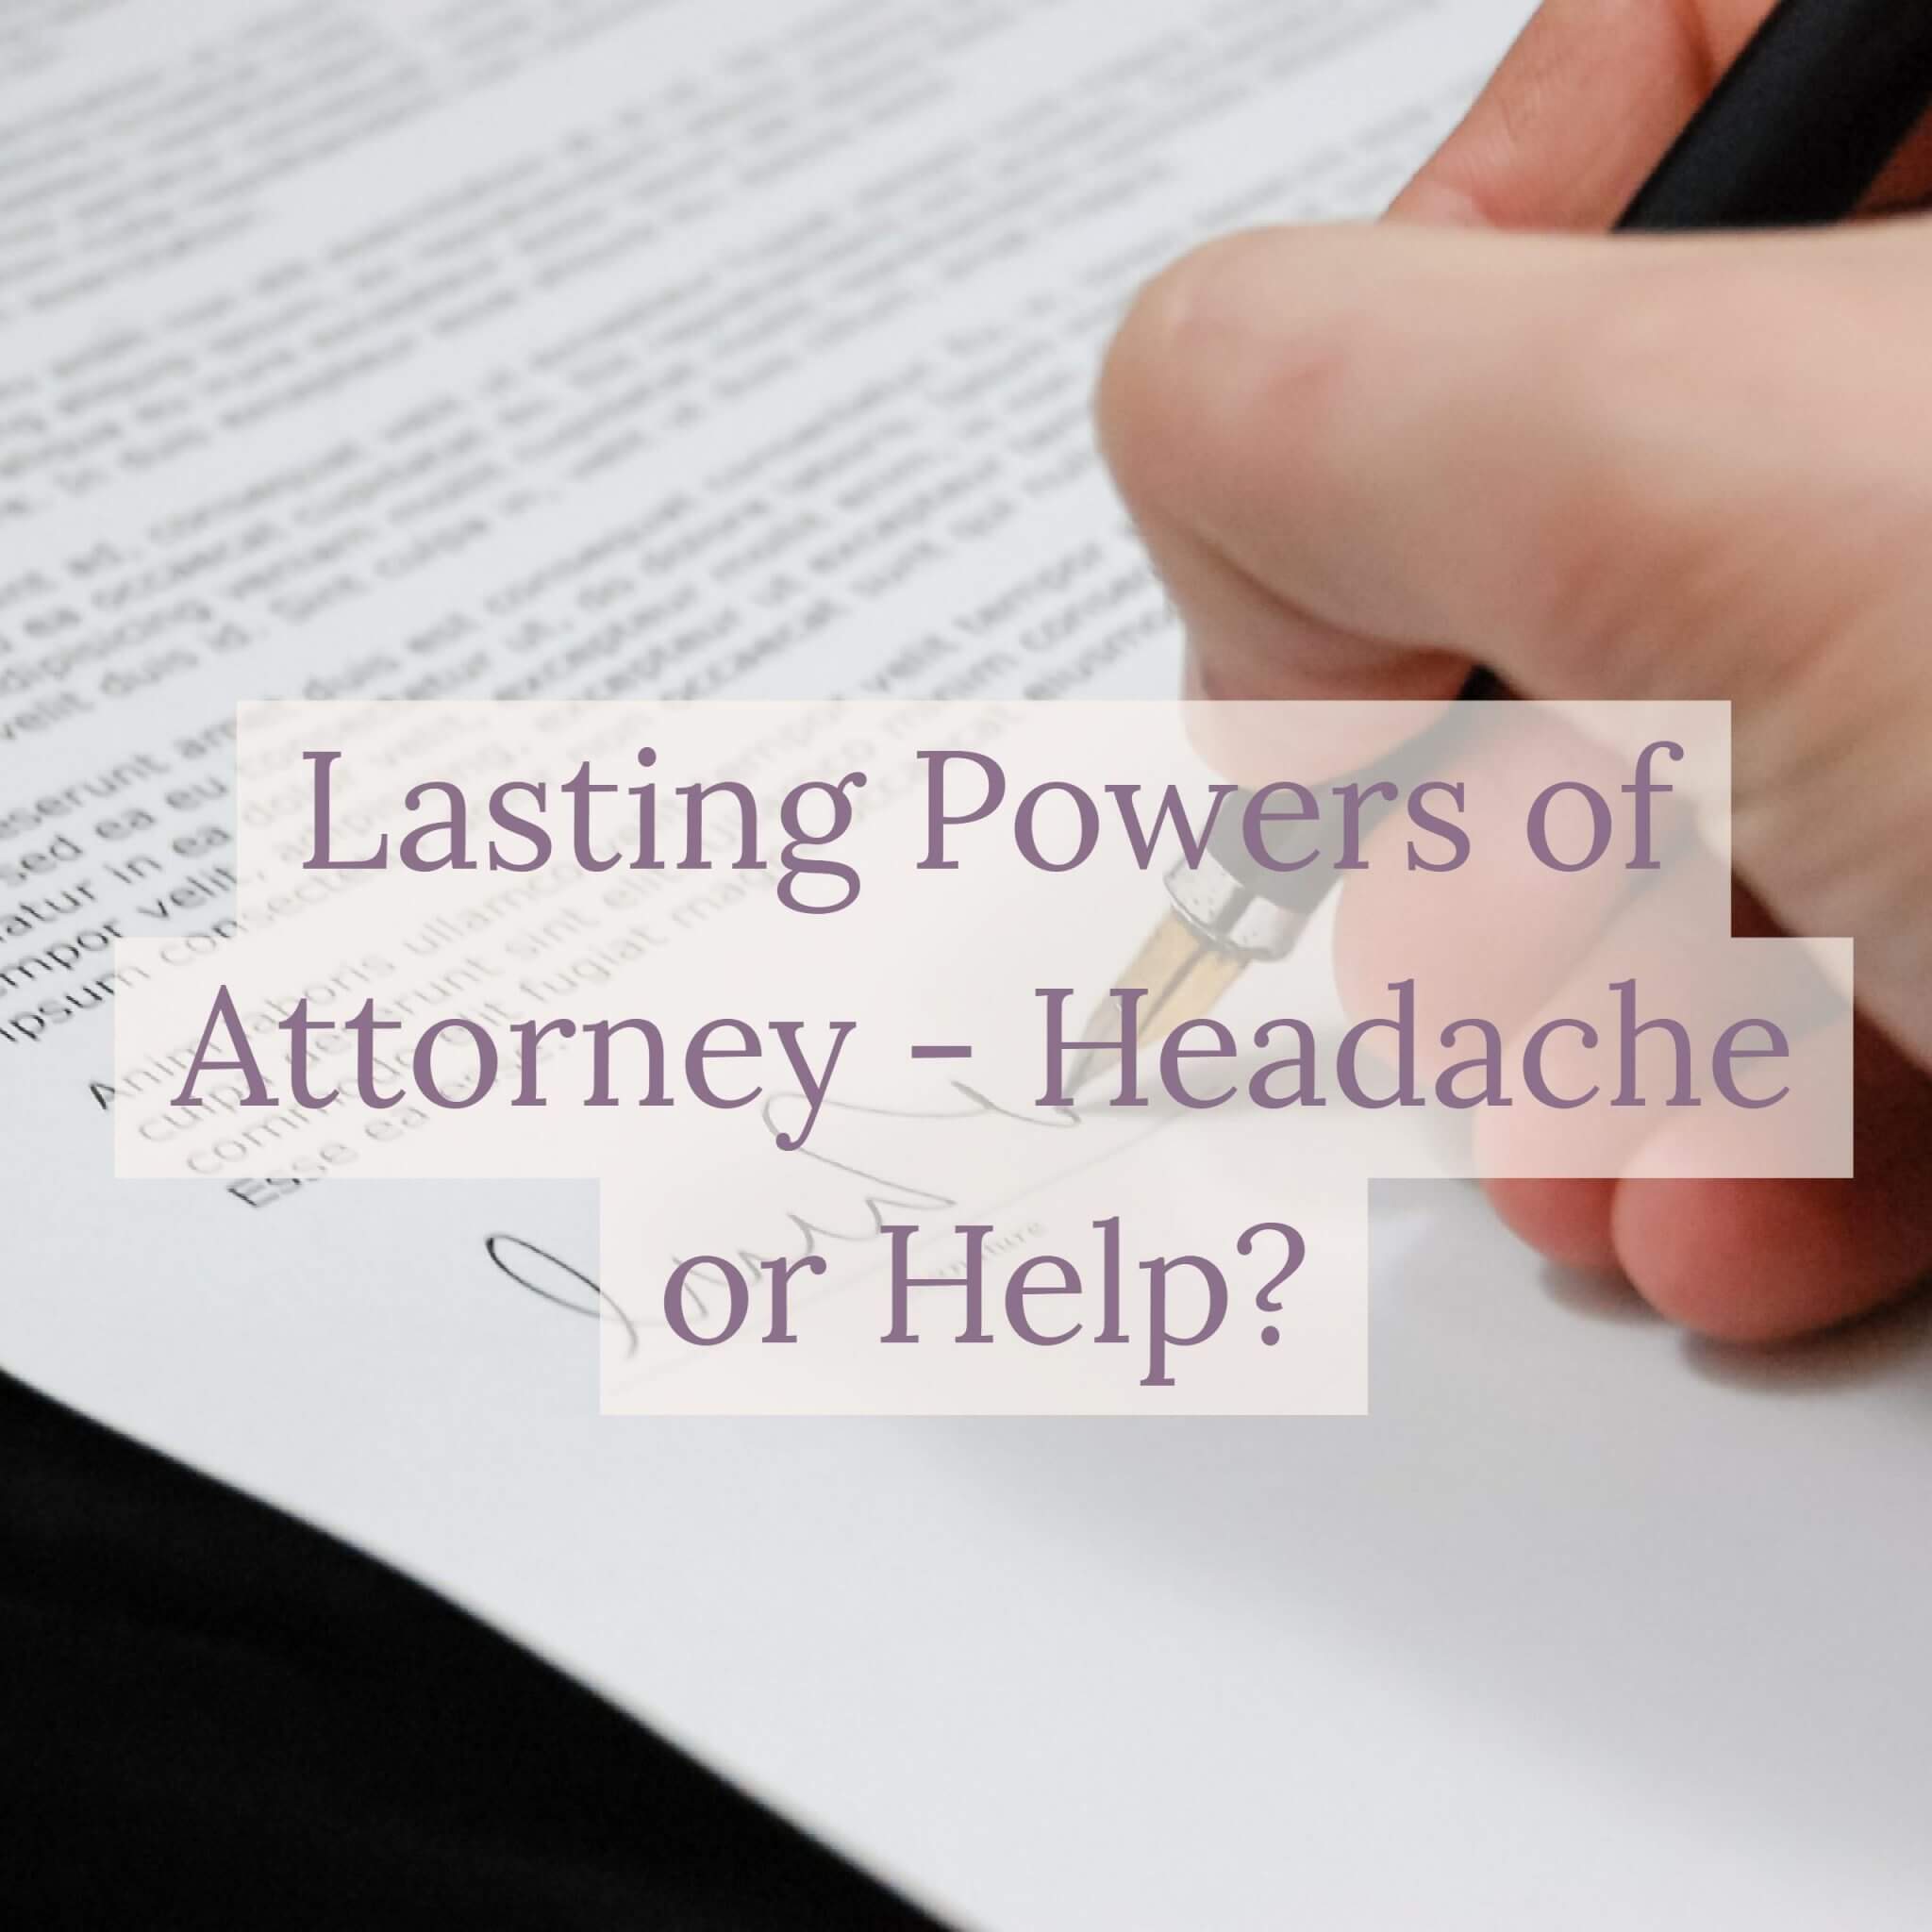 lasting powers of attorney - headache or help